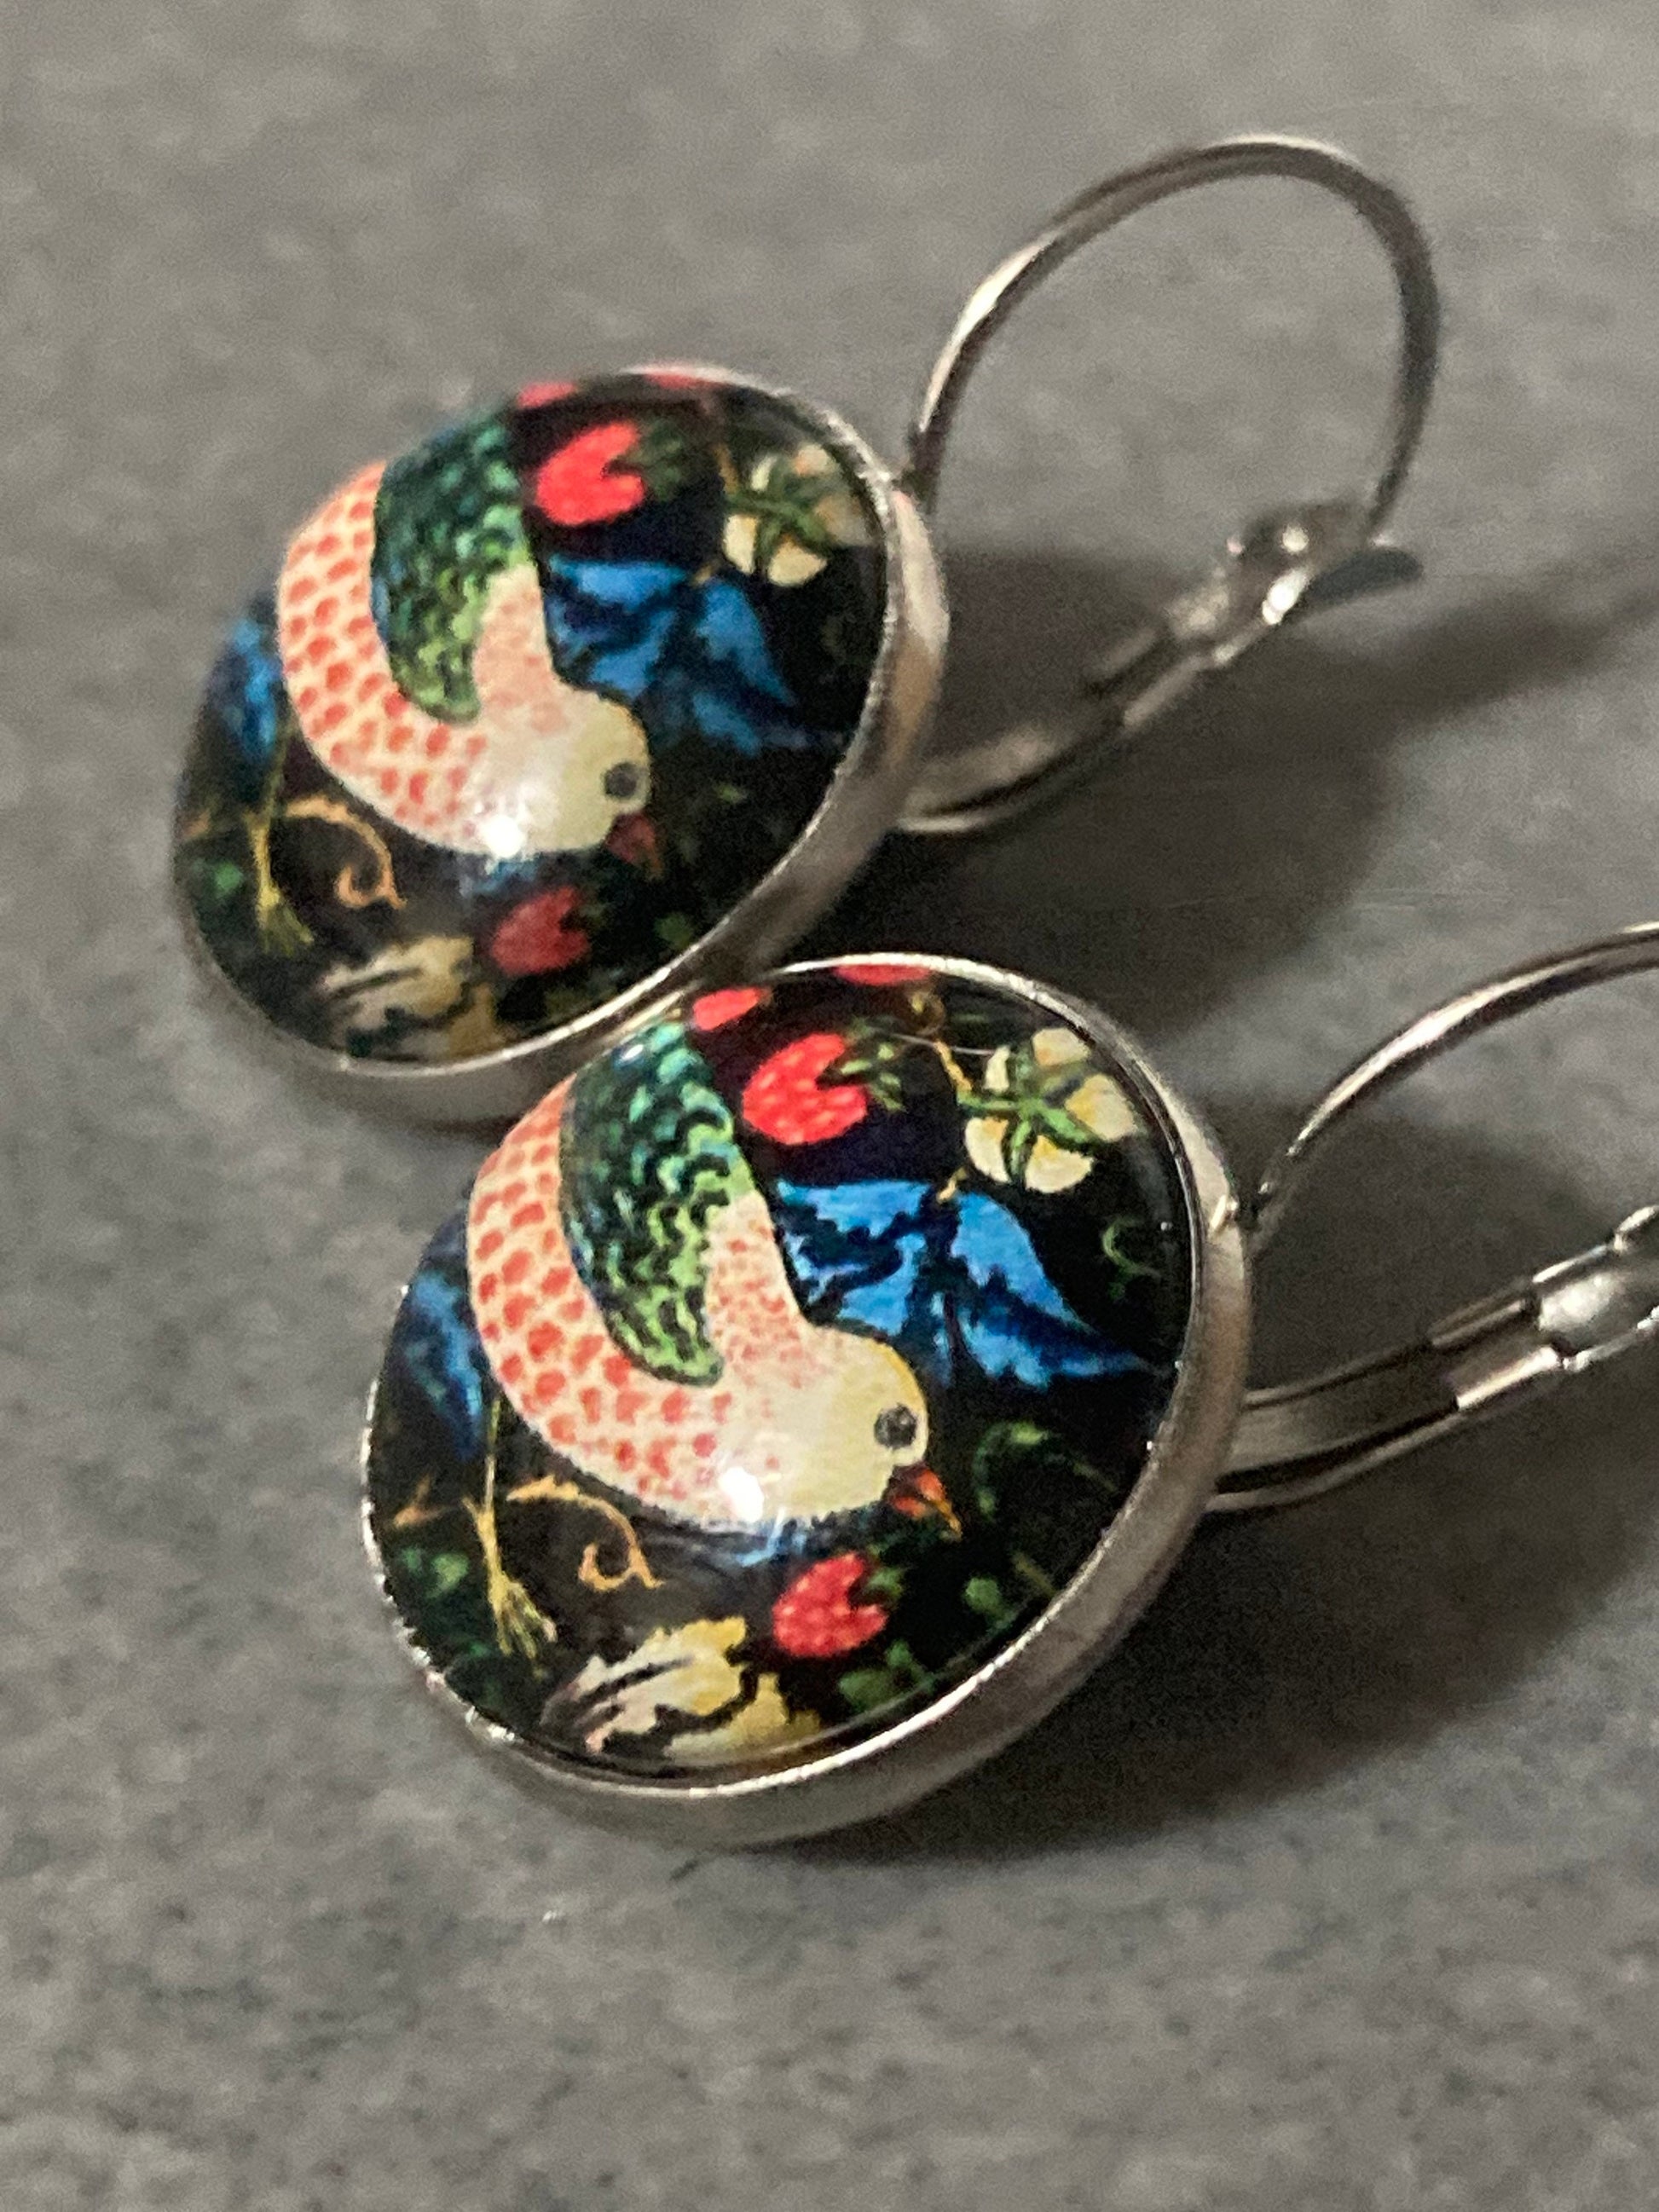 William Morris earrings strawberry thief print 18mm round glass cabochon